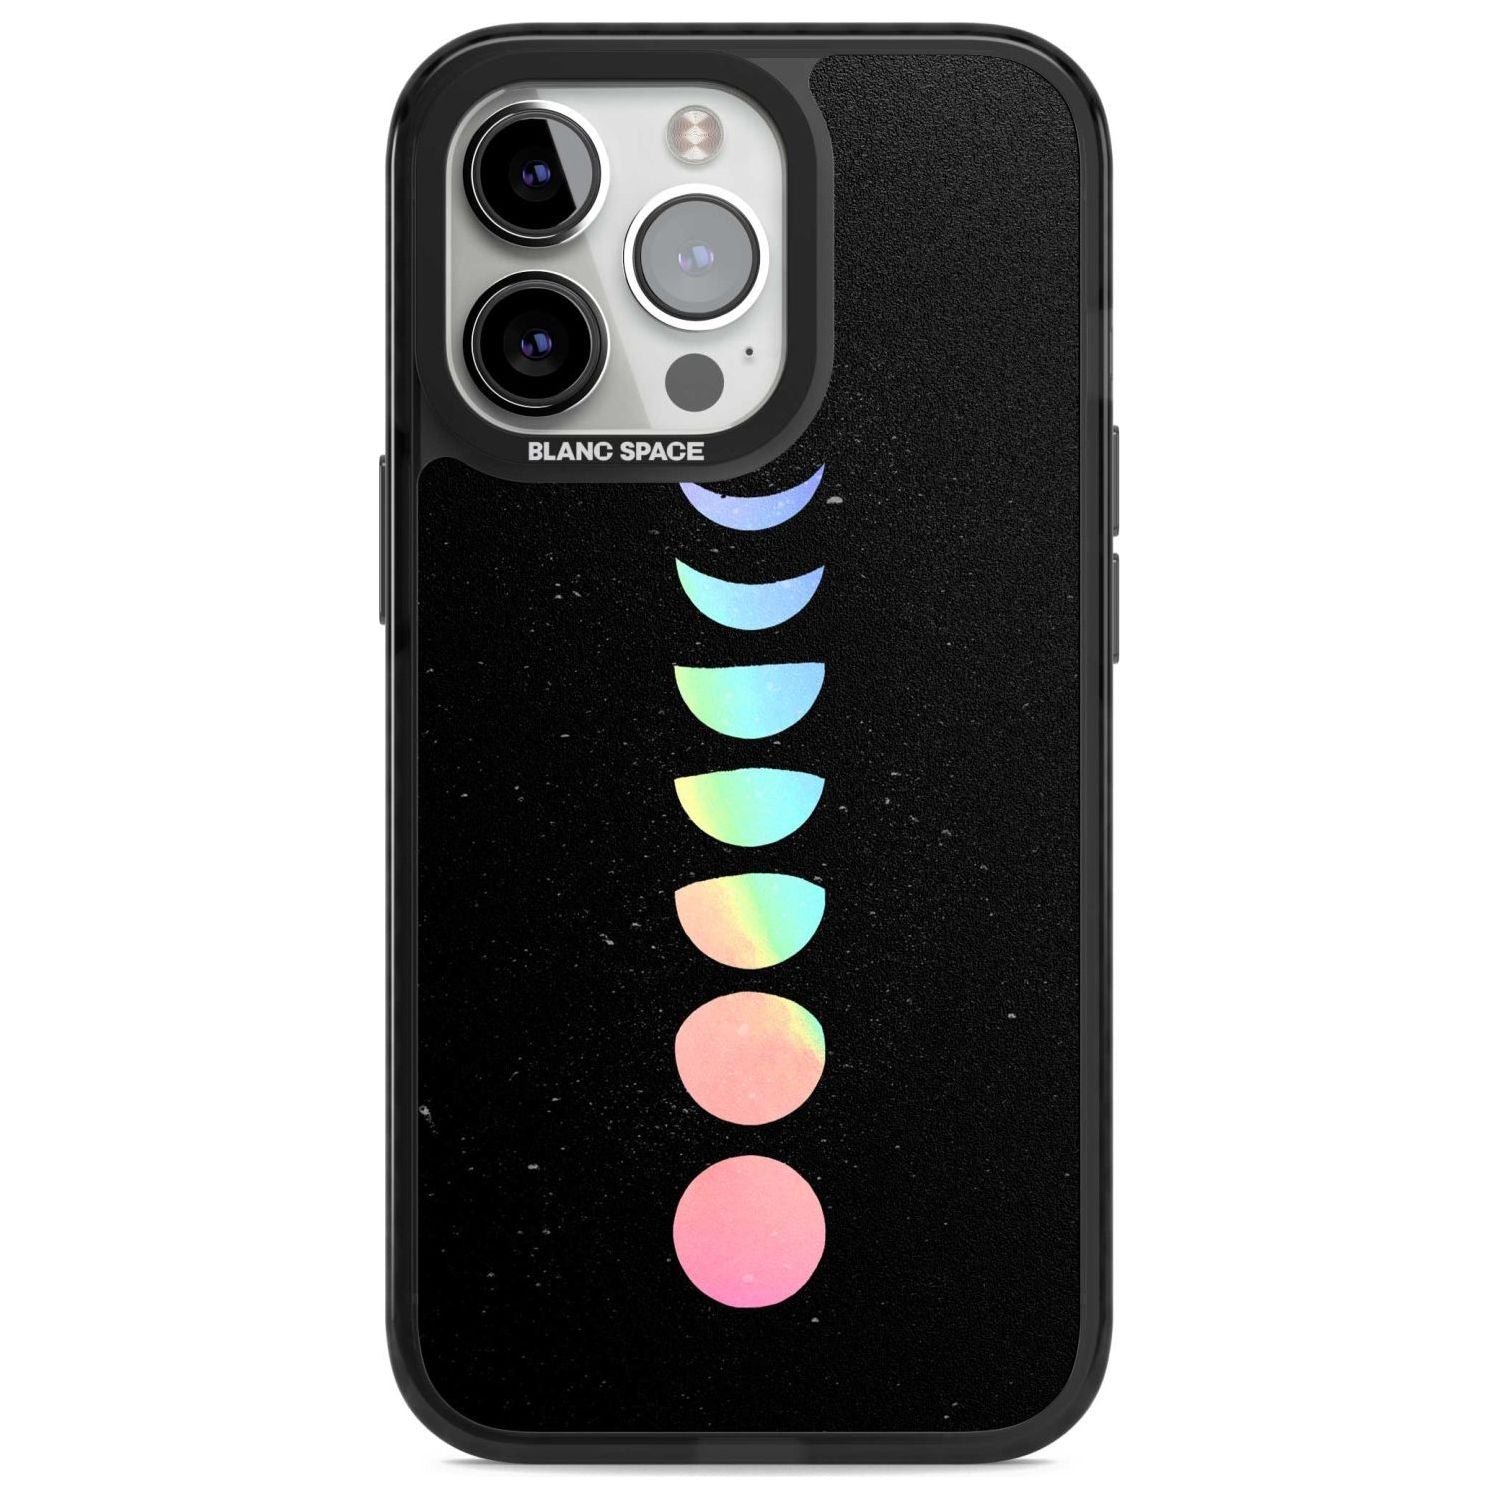 Pastel Moon Phases Phone Case iPhone 15 Pro Max / Magsafe Black Impact Case,iPhone 15 Pro / Magsafe Black Impact Case,iPhone 14 Pro Max / Magsafe Black Impact Case,iPhone 14 Pro / Magsafe Black Impact Case,iPhone 13 Pro / Magsafe Black Impact Case Blanc Space